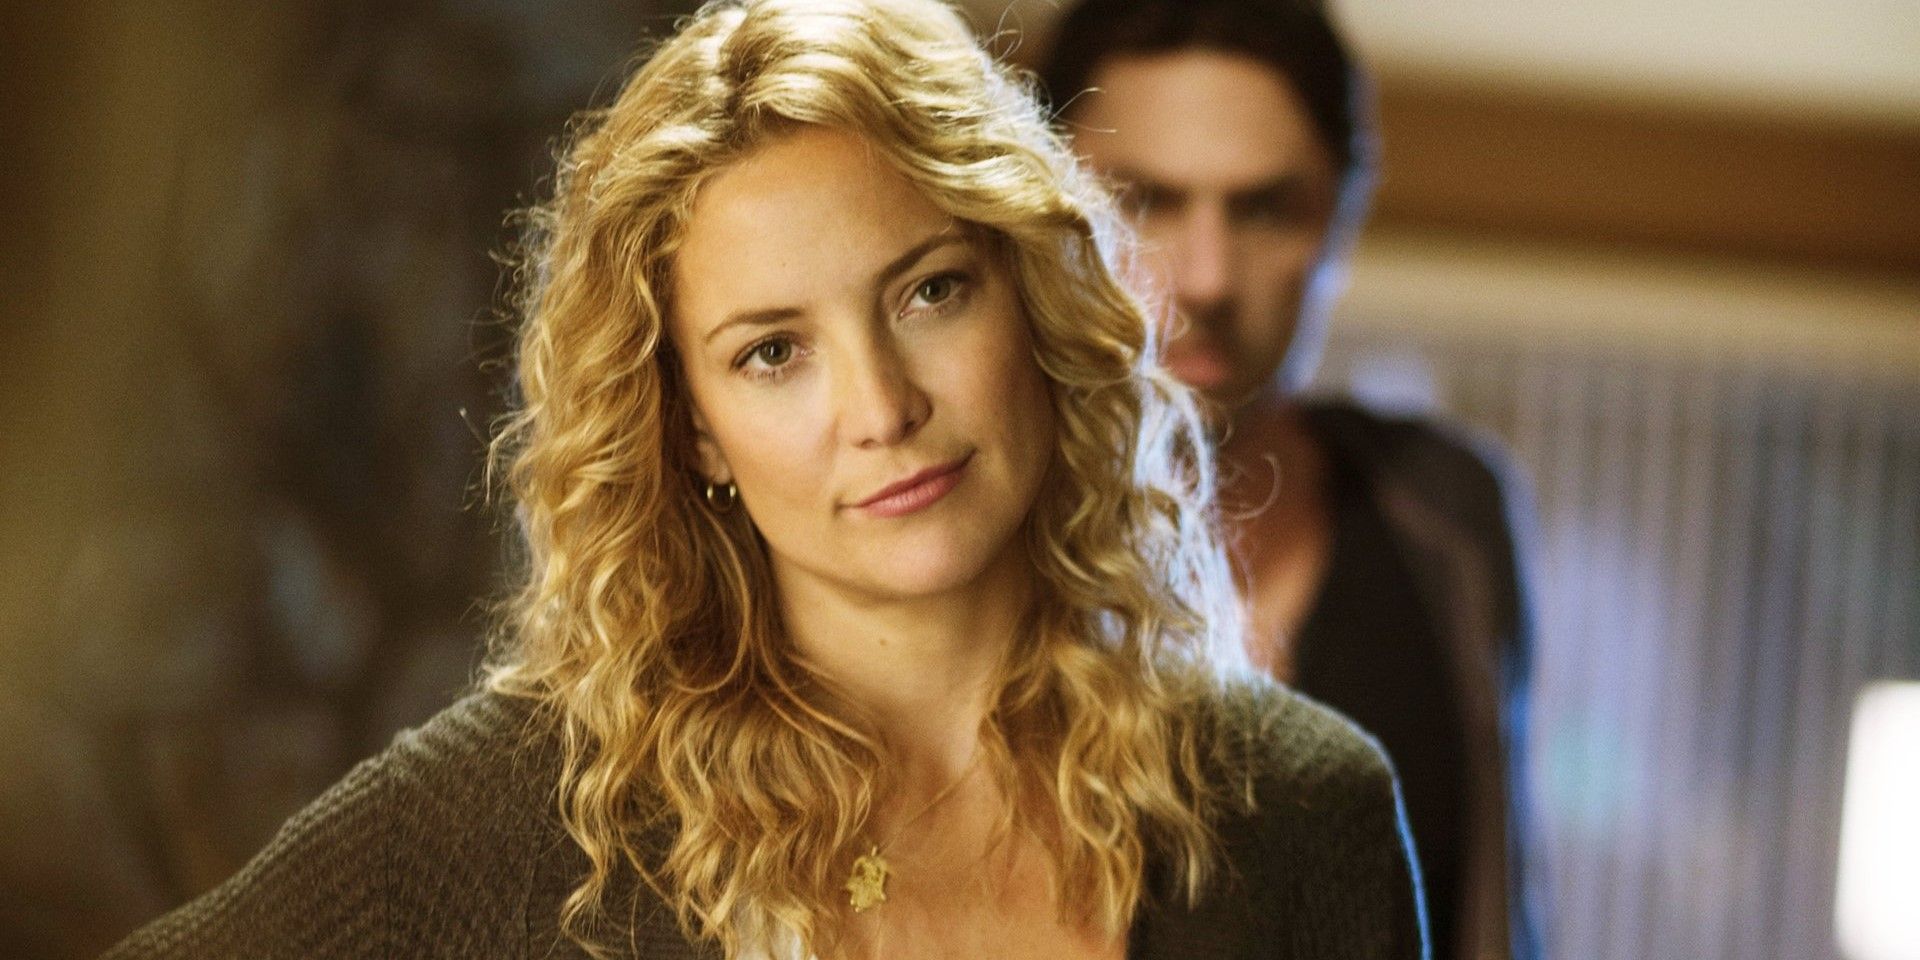 10 Kate Hudson Movies, Ranked (According To Rotten Tomatoes)